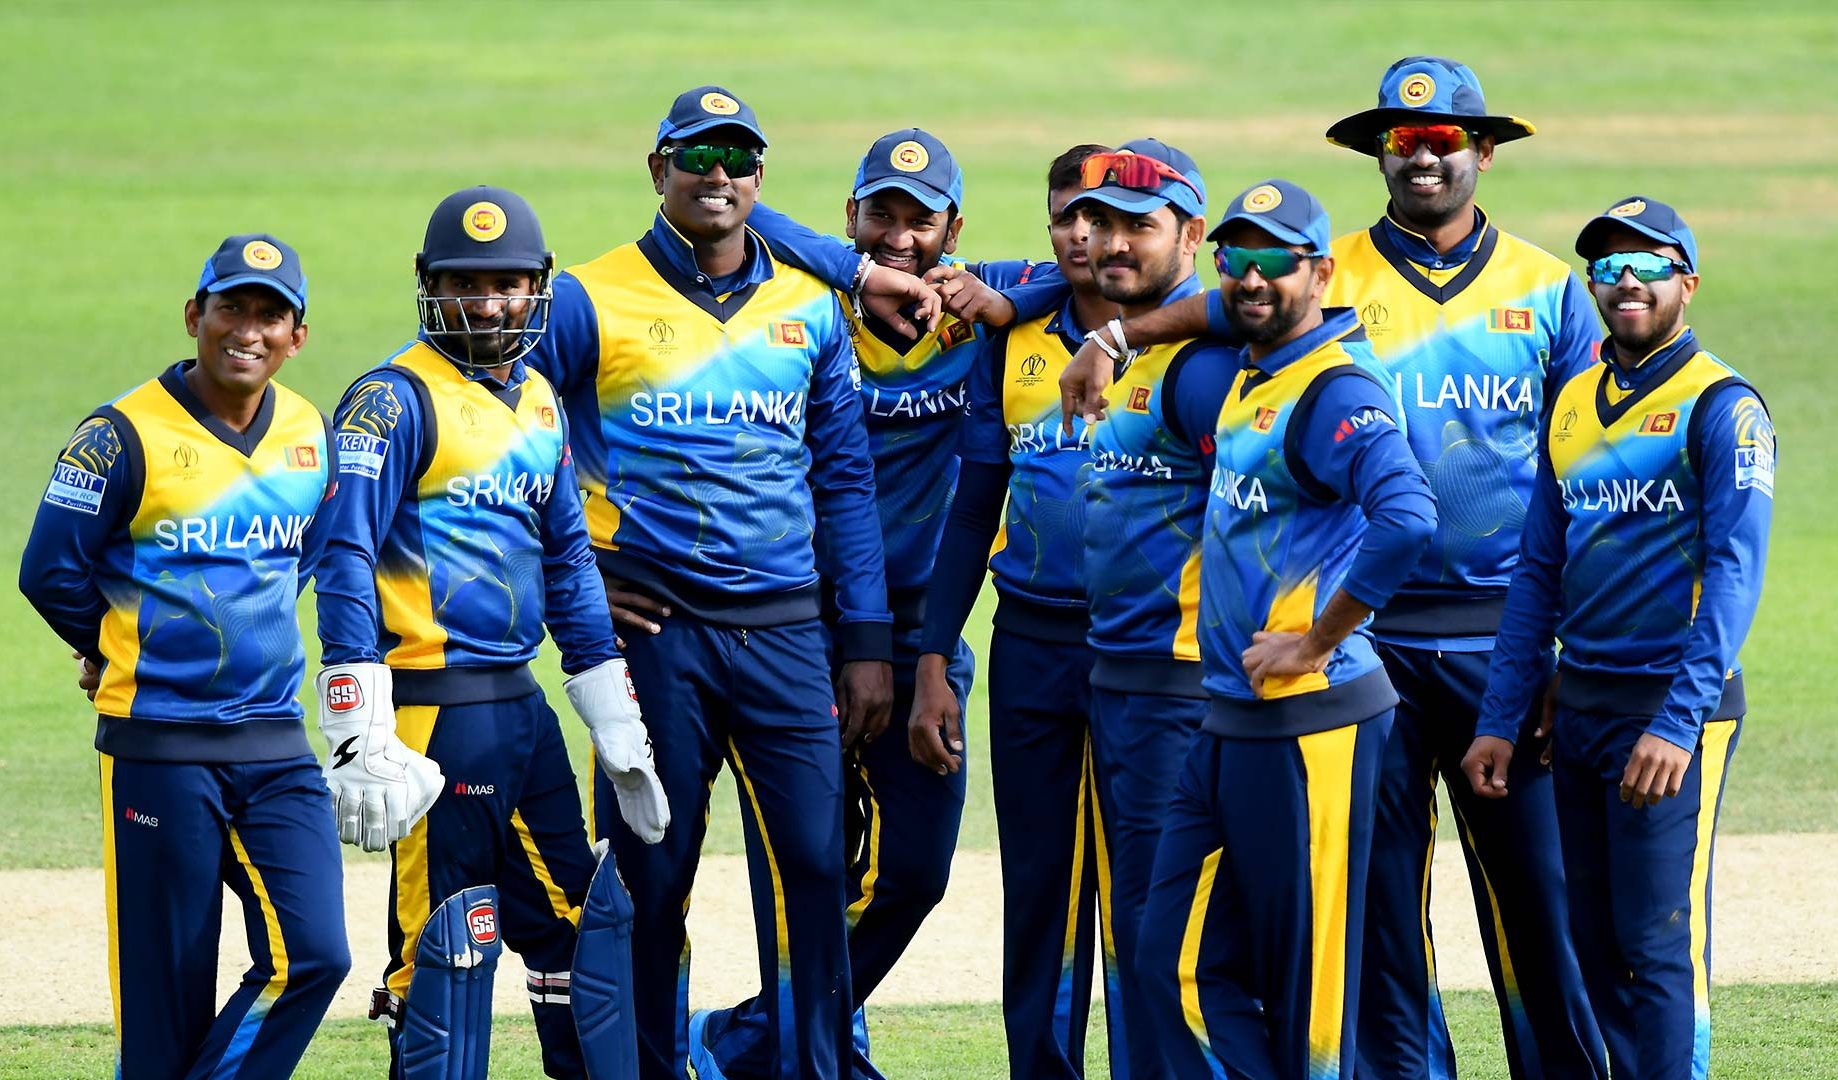 SL VS IND 2021: Sri Lanka’s Data Analyst Tests Positive For COVID-19, 2nd Case In The Team